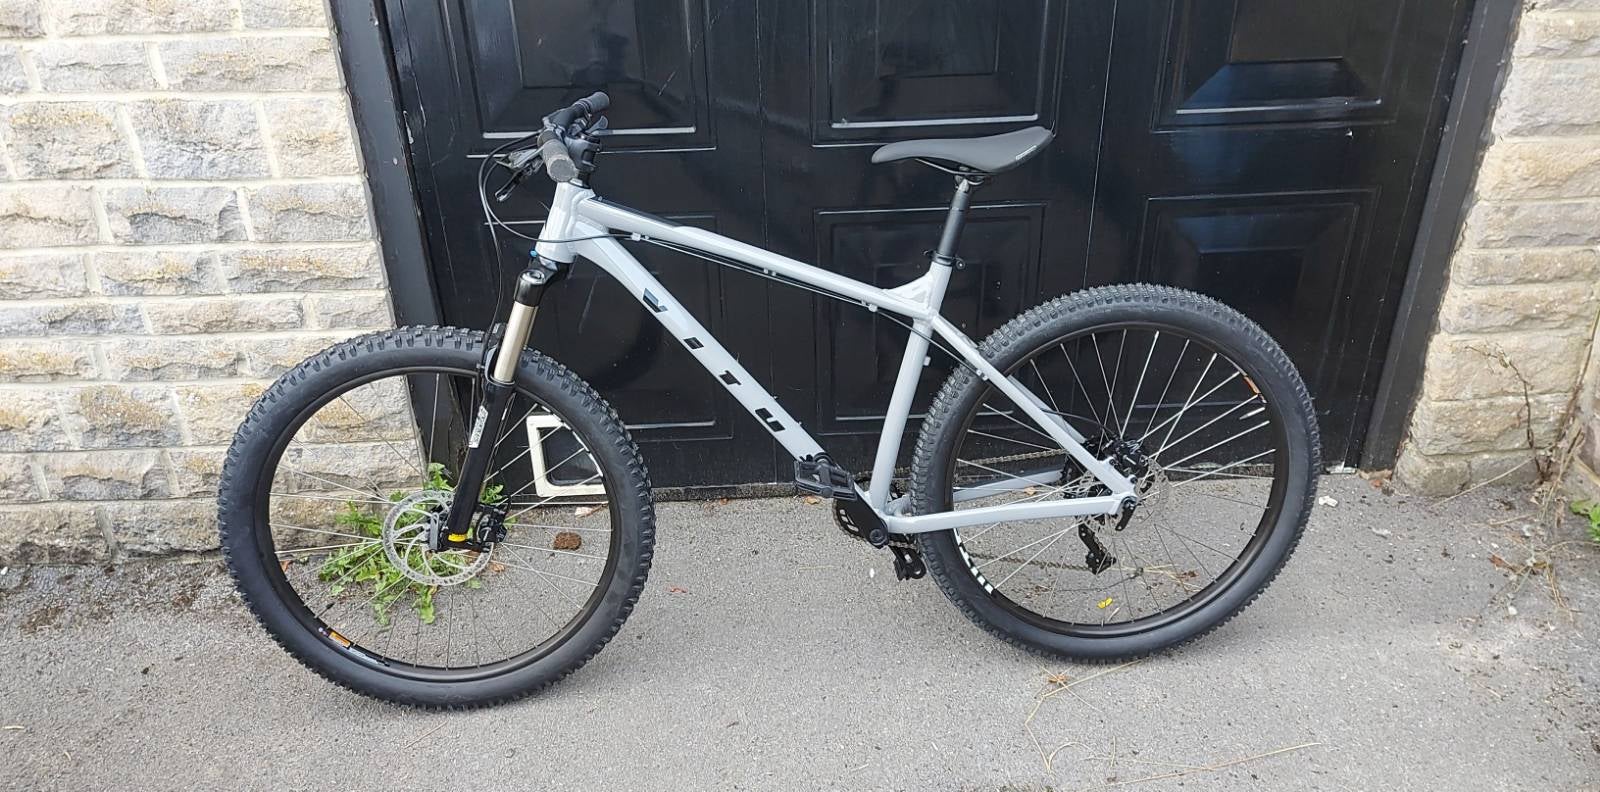 Maybe not as nice as a lot of yours, but I’ve just got this and absolutely love it. 32 and starting a new hobby : mountainbiking